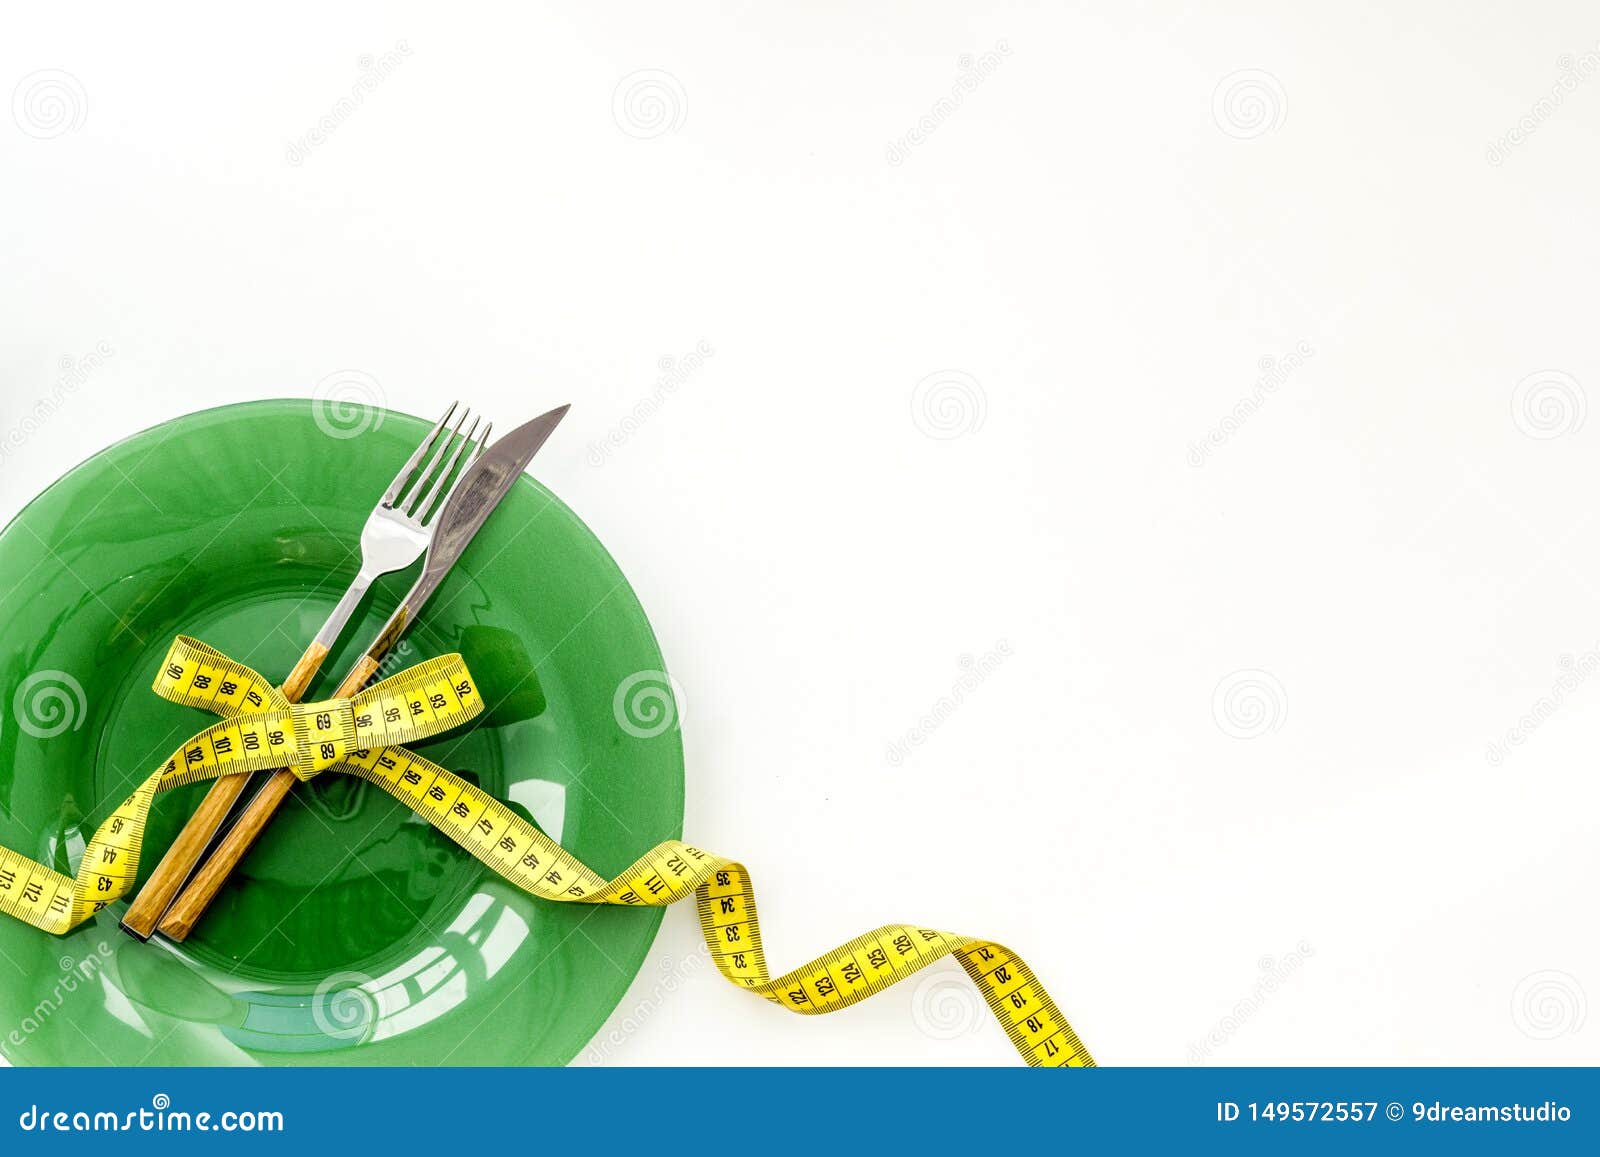 Download Slim Concept With Plate, Flatware And Measuring Tape On ...